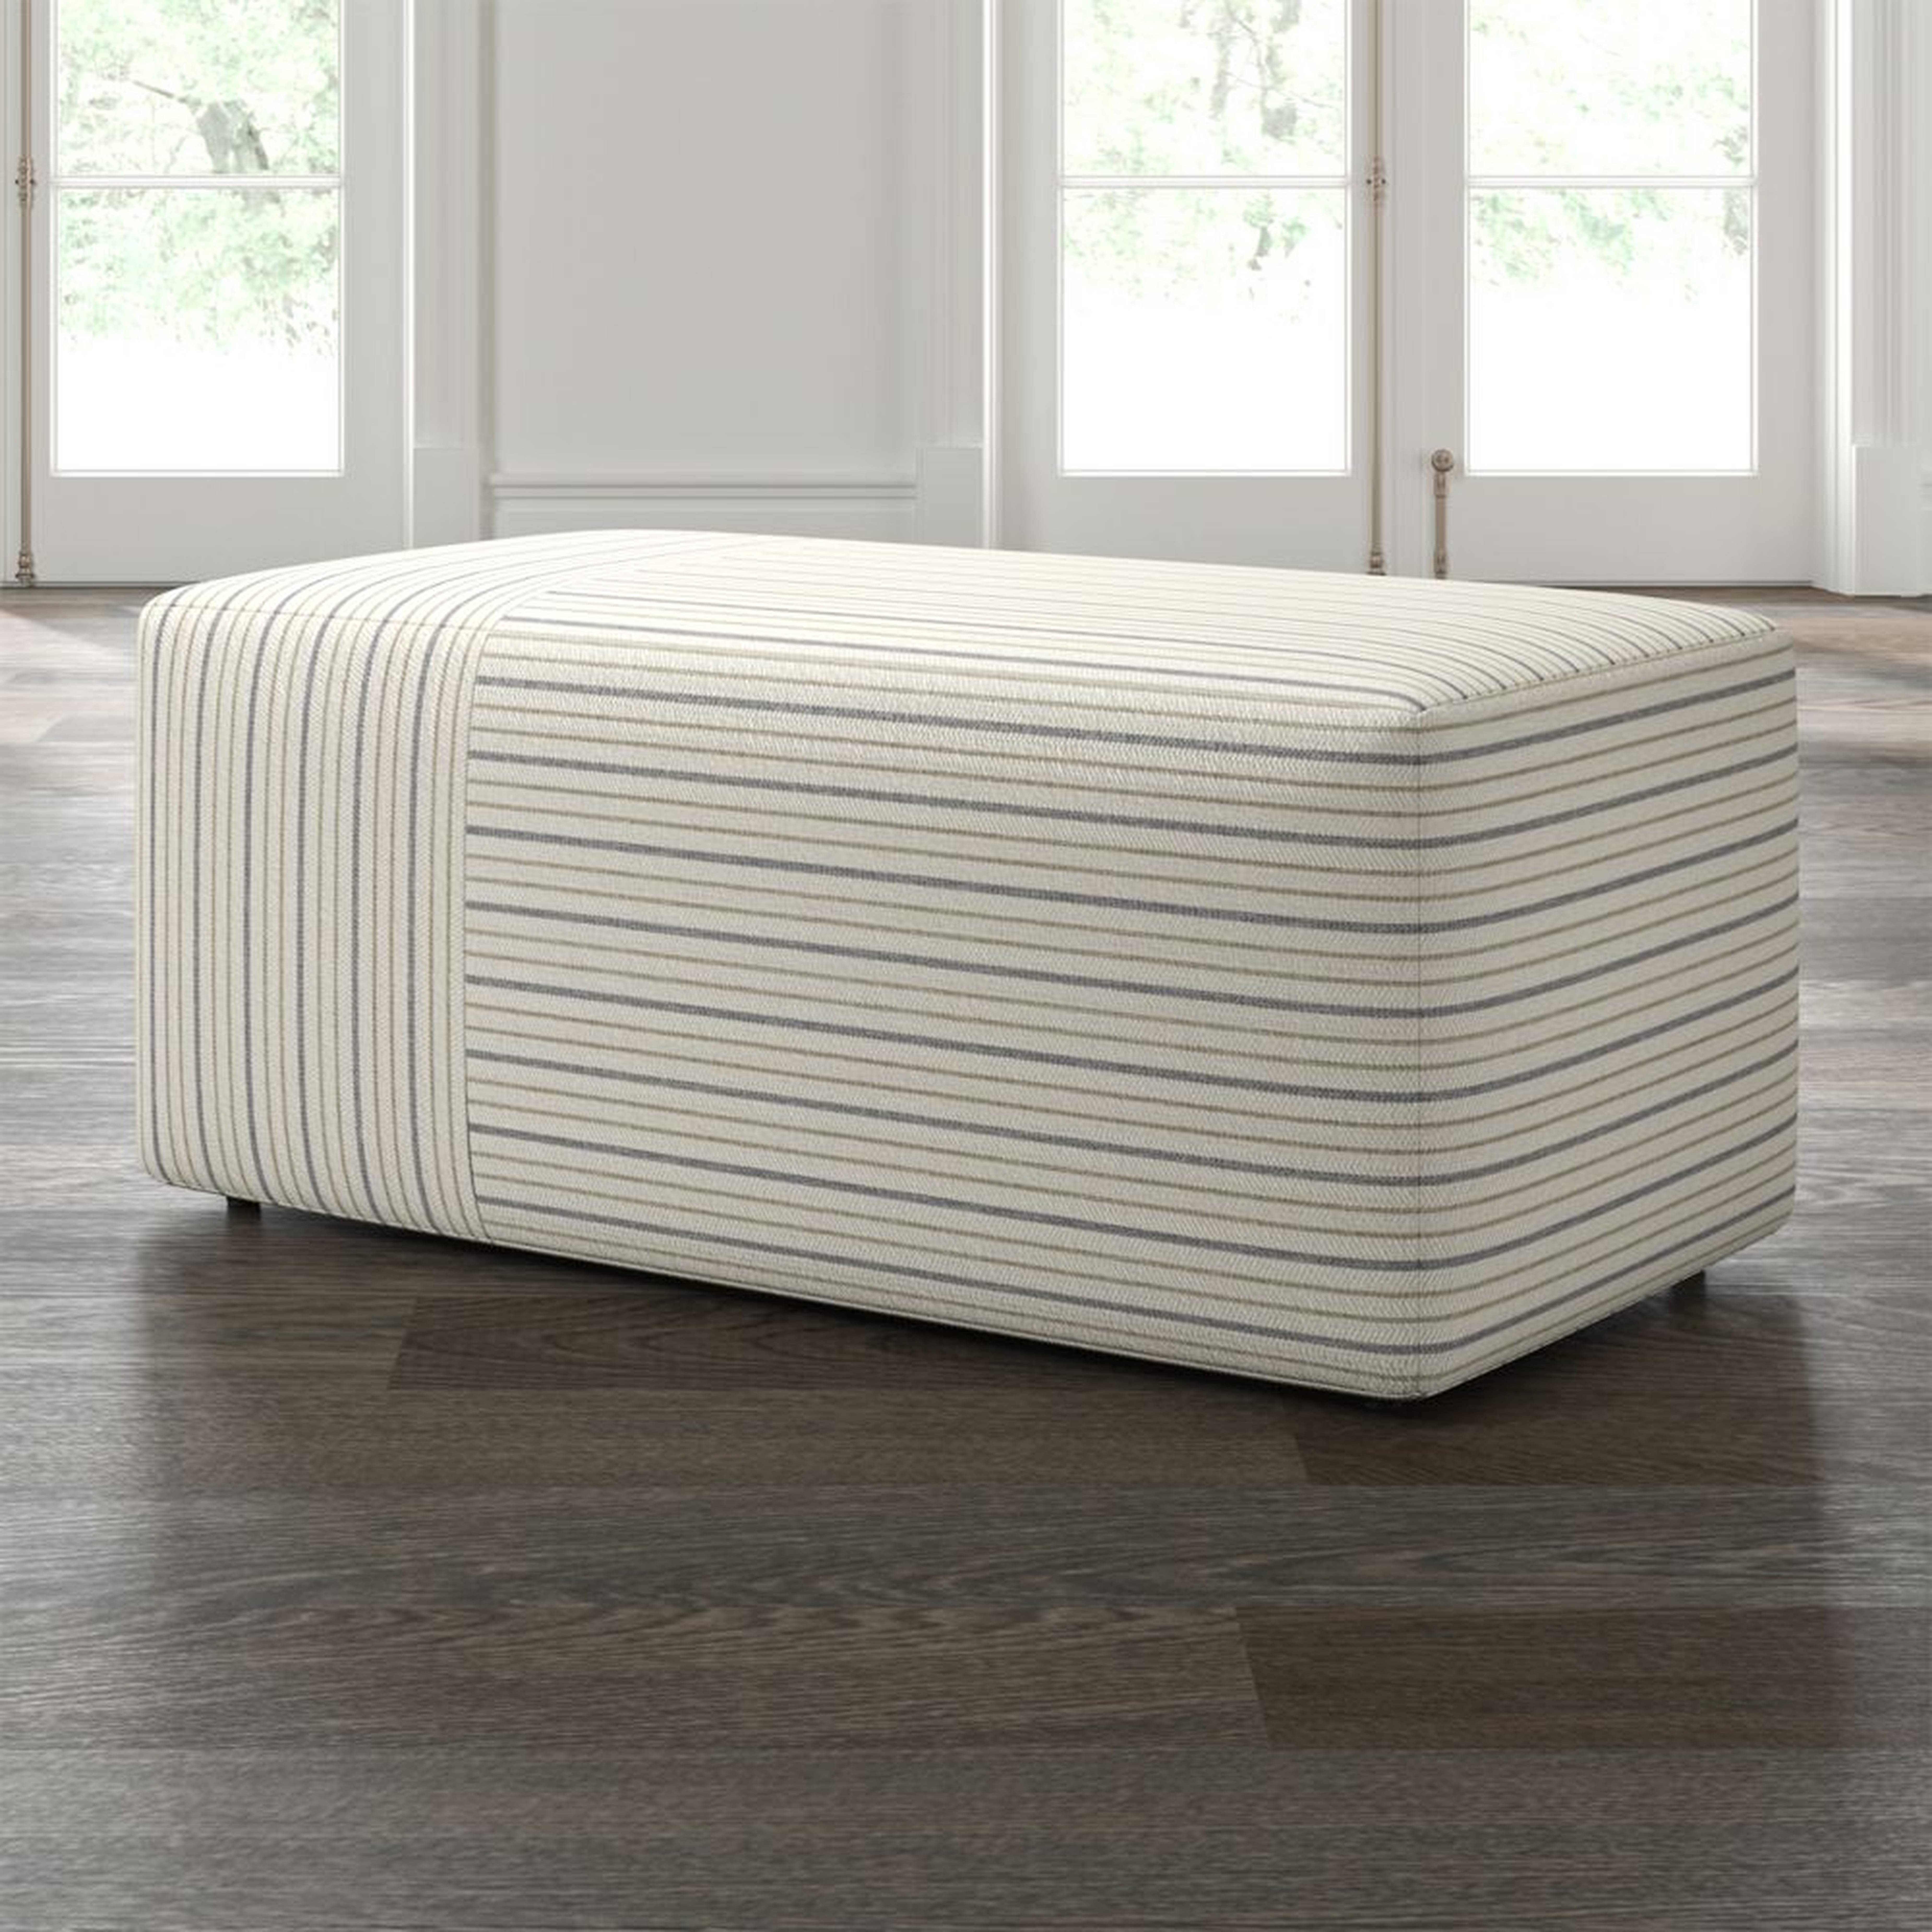 Tommi Rectangular Striped Ottoman - Crate and Barrel